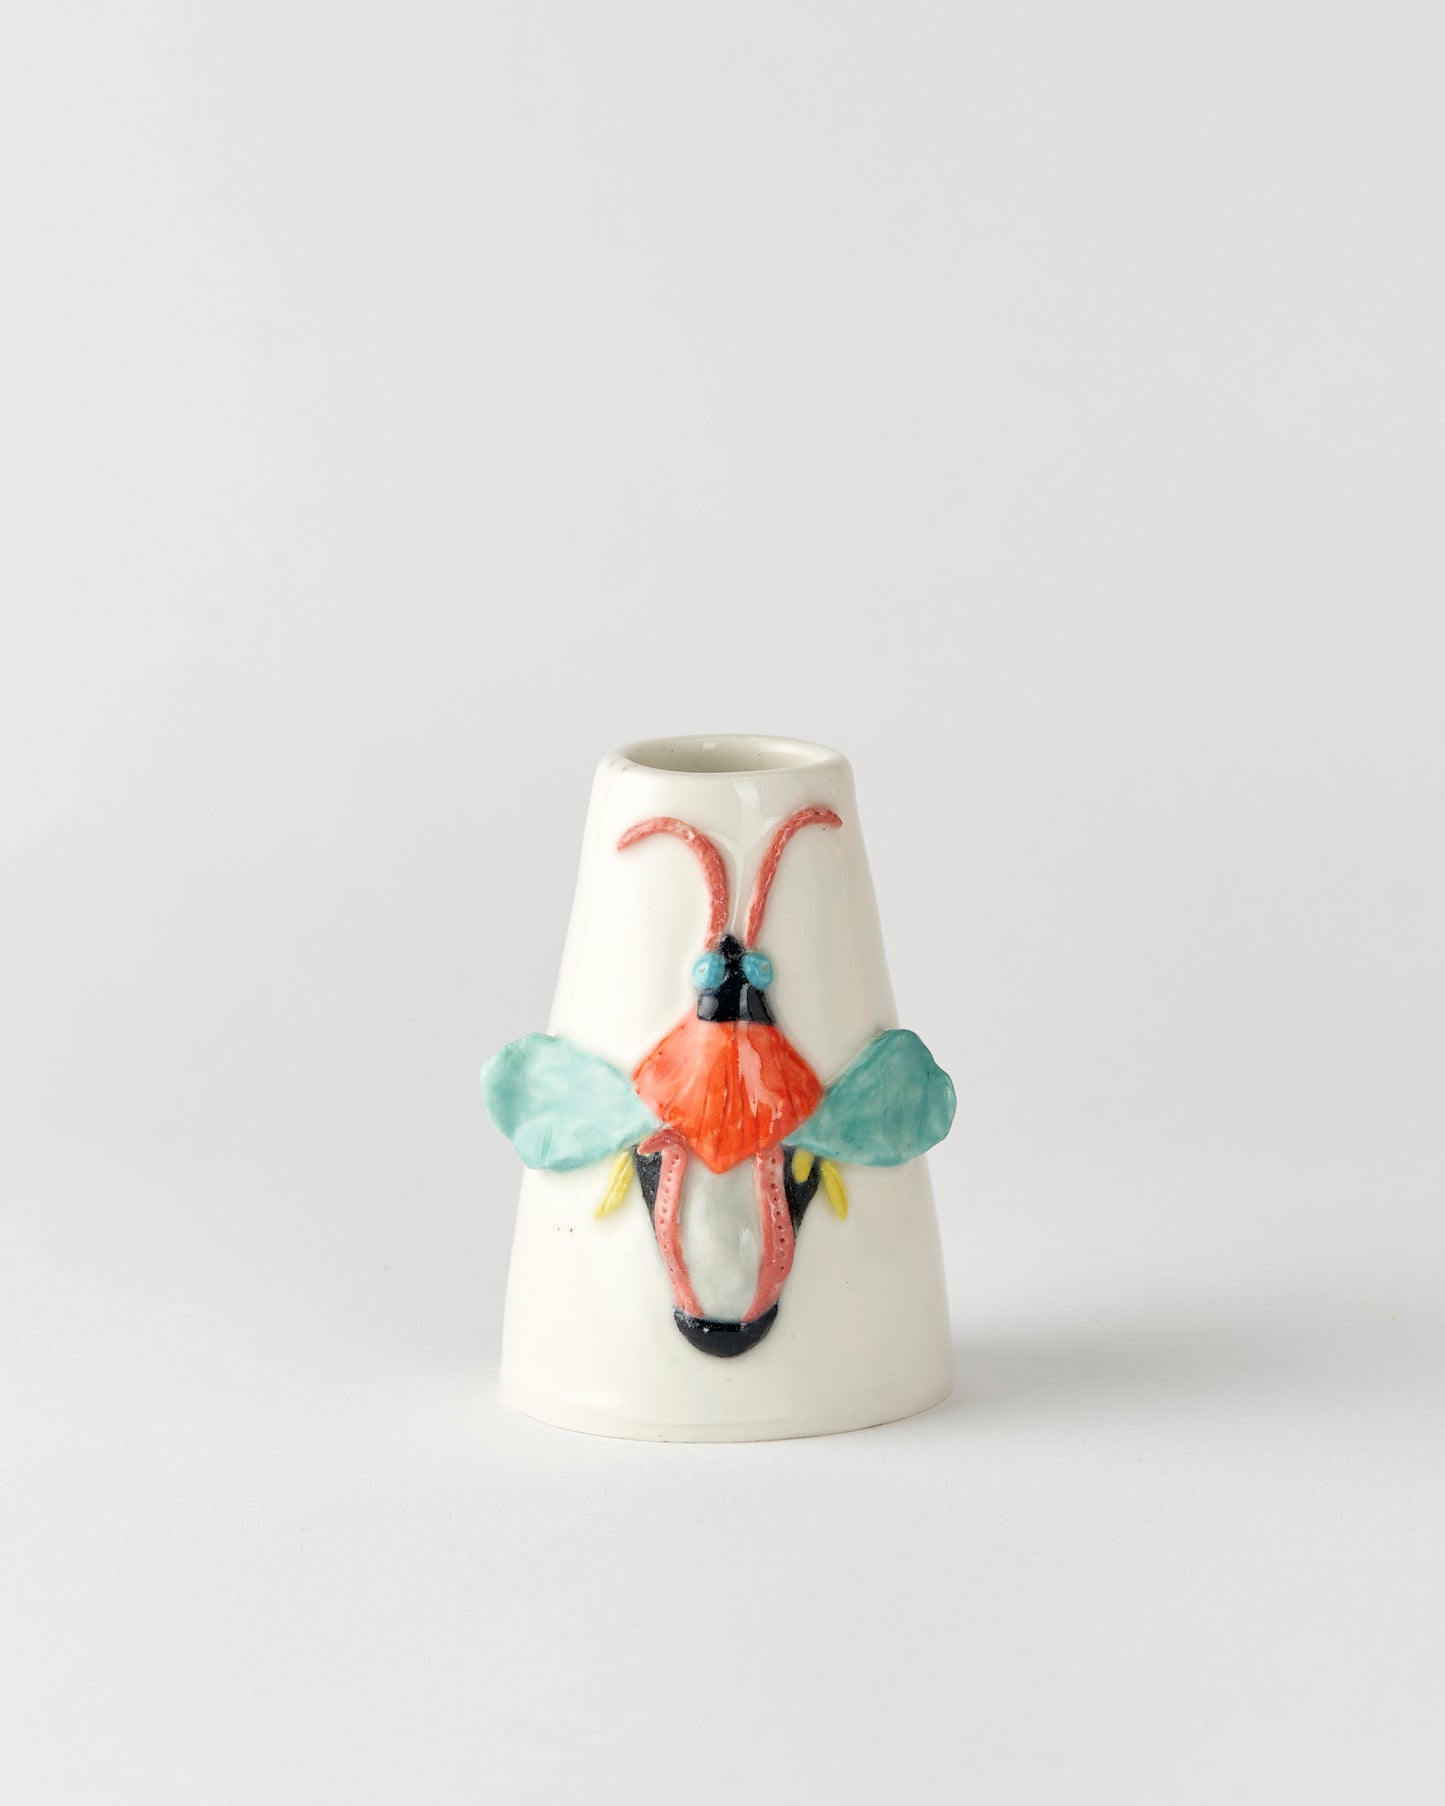 Marie Priour / Anthropode / Small Vase #1